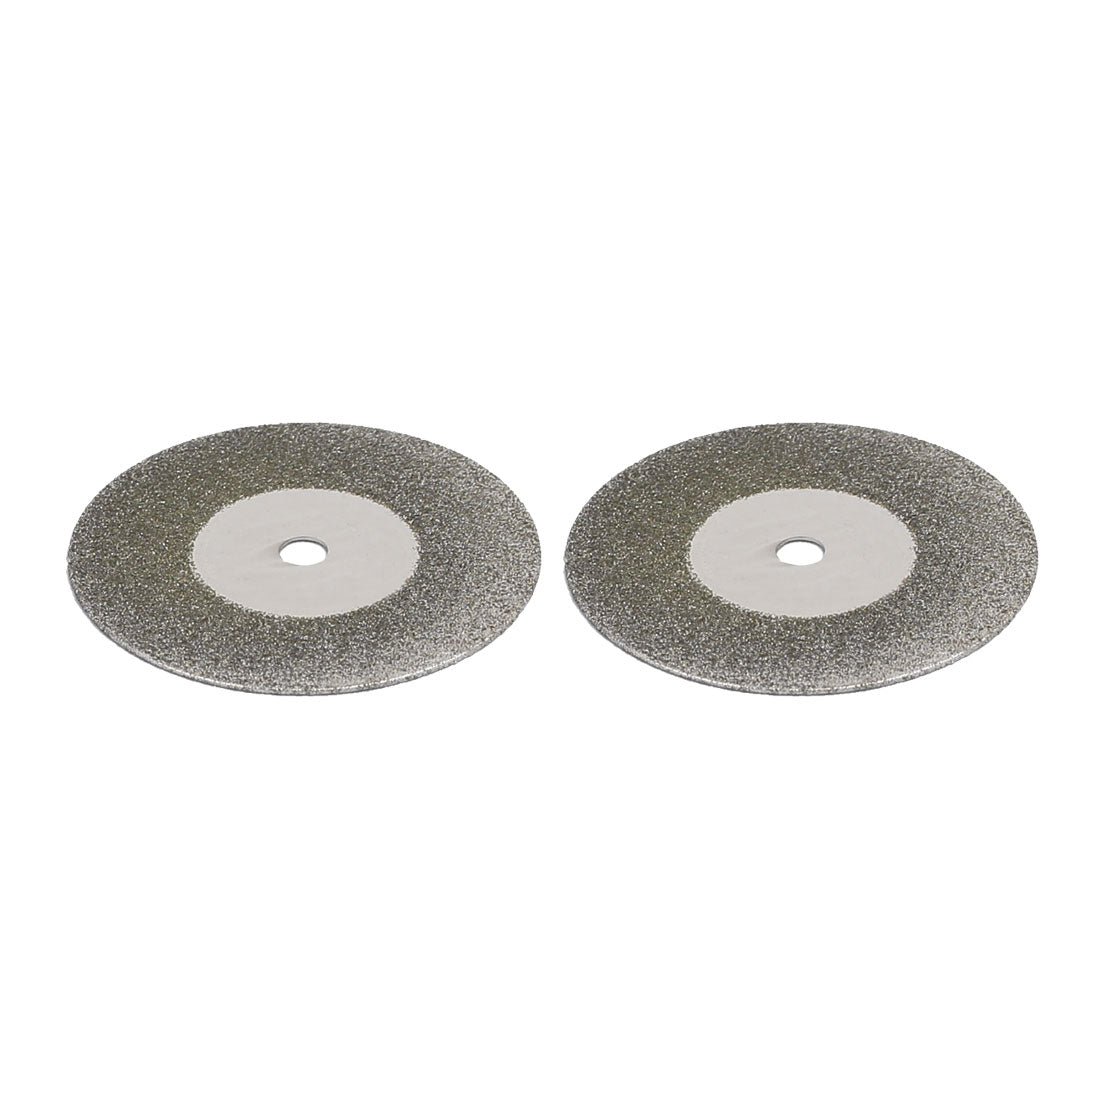 uxcell Uxcell 30mm Dia Diamond Coated Flat Lap Disk Wheel Grinding Sanding Disc 2pcs